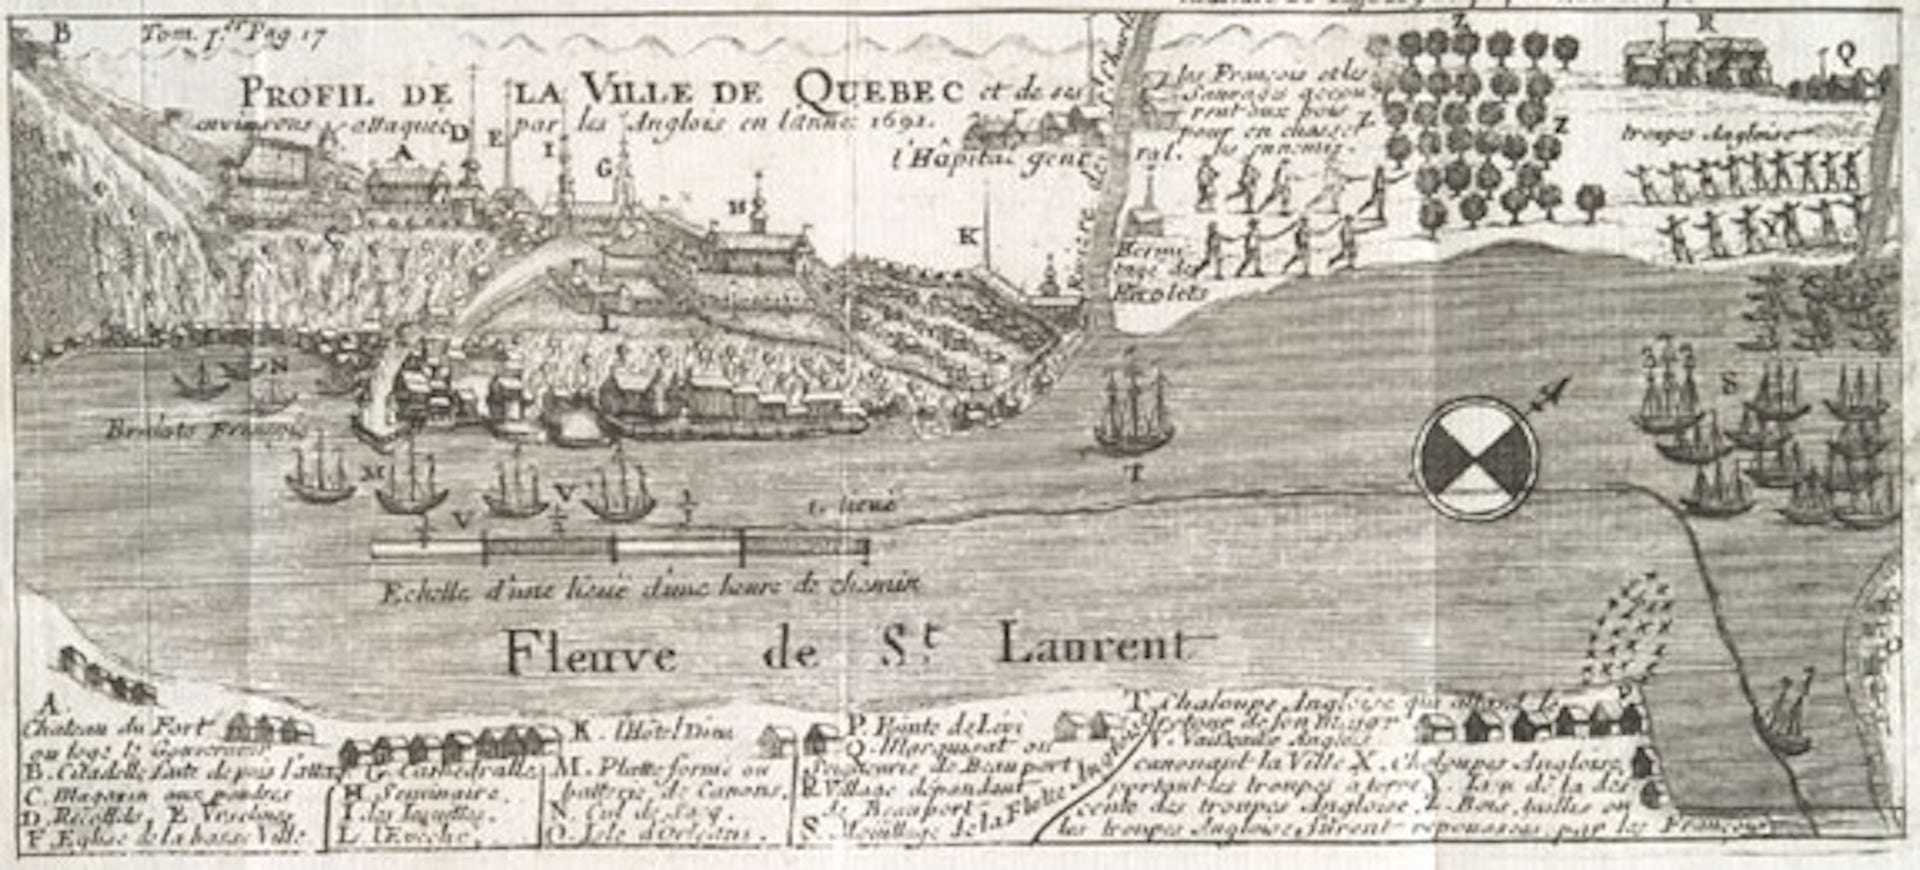 17th century map of Quebec showing large ships on the water and a compass.